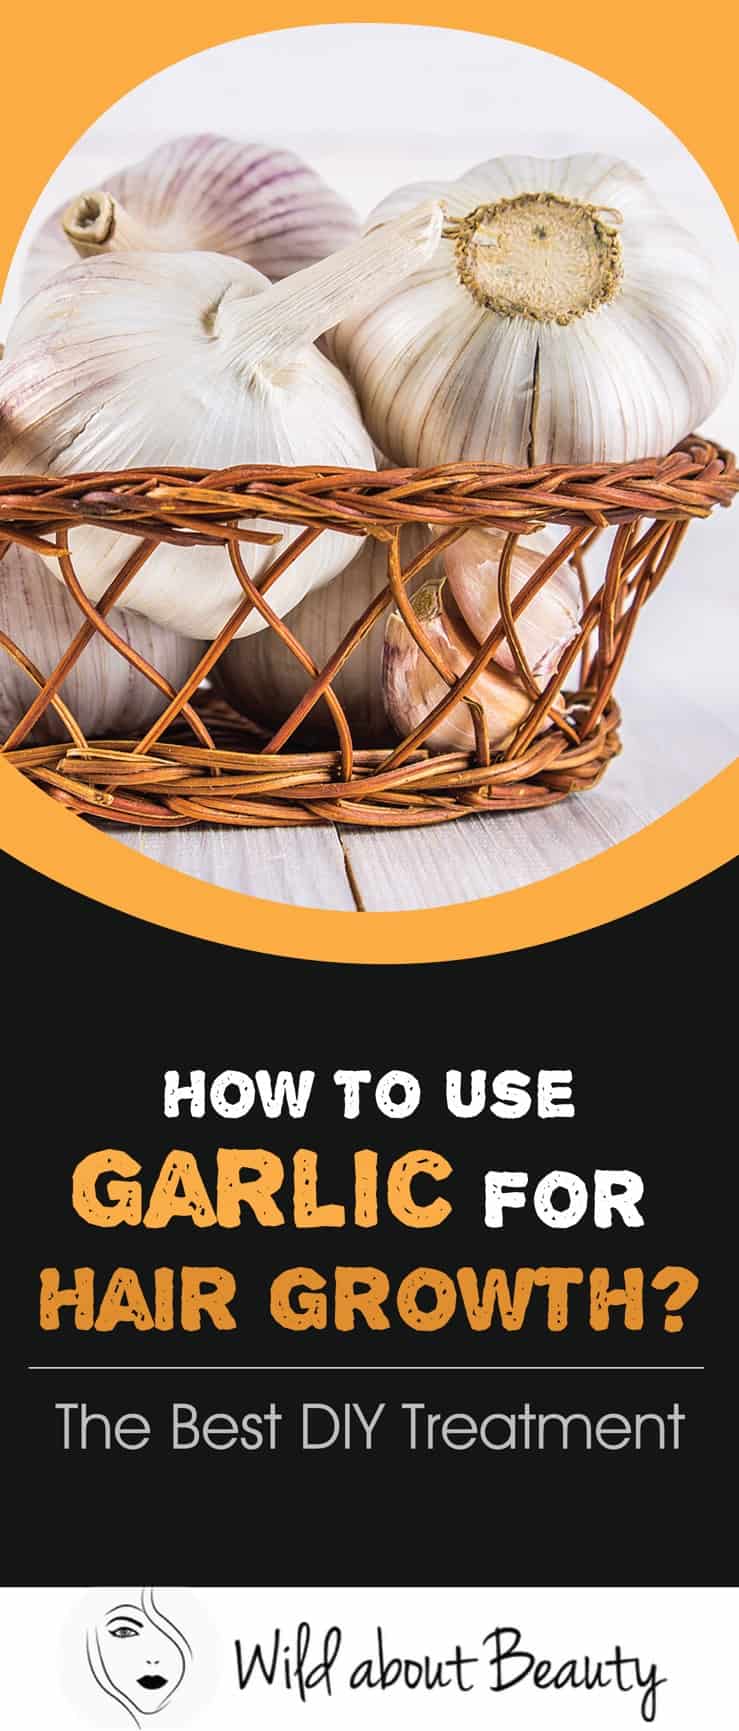 How to Use Garlic for Hair Growth? The Best DIY Treatment